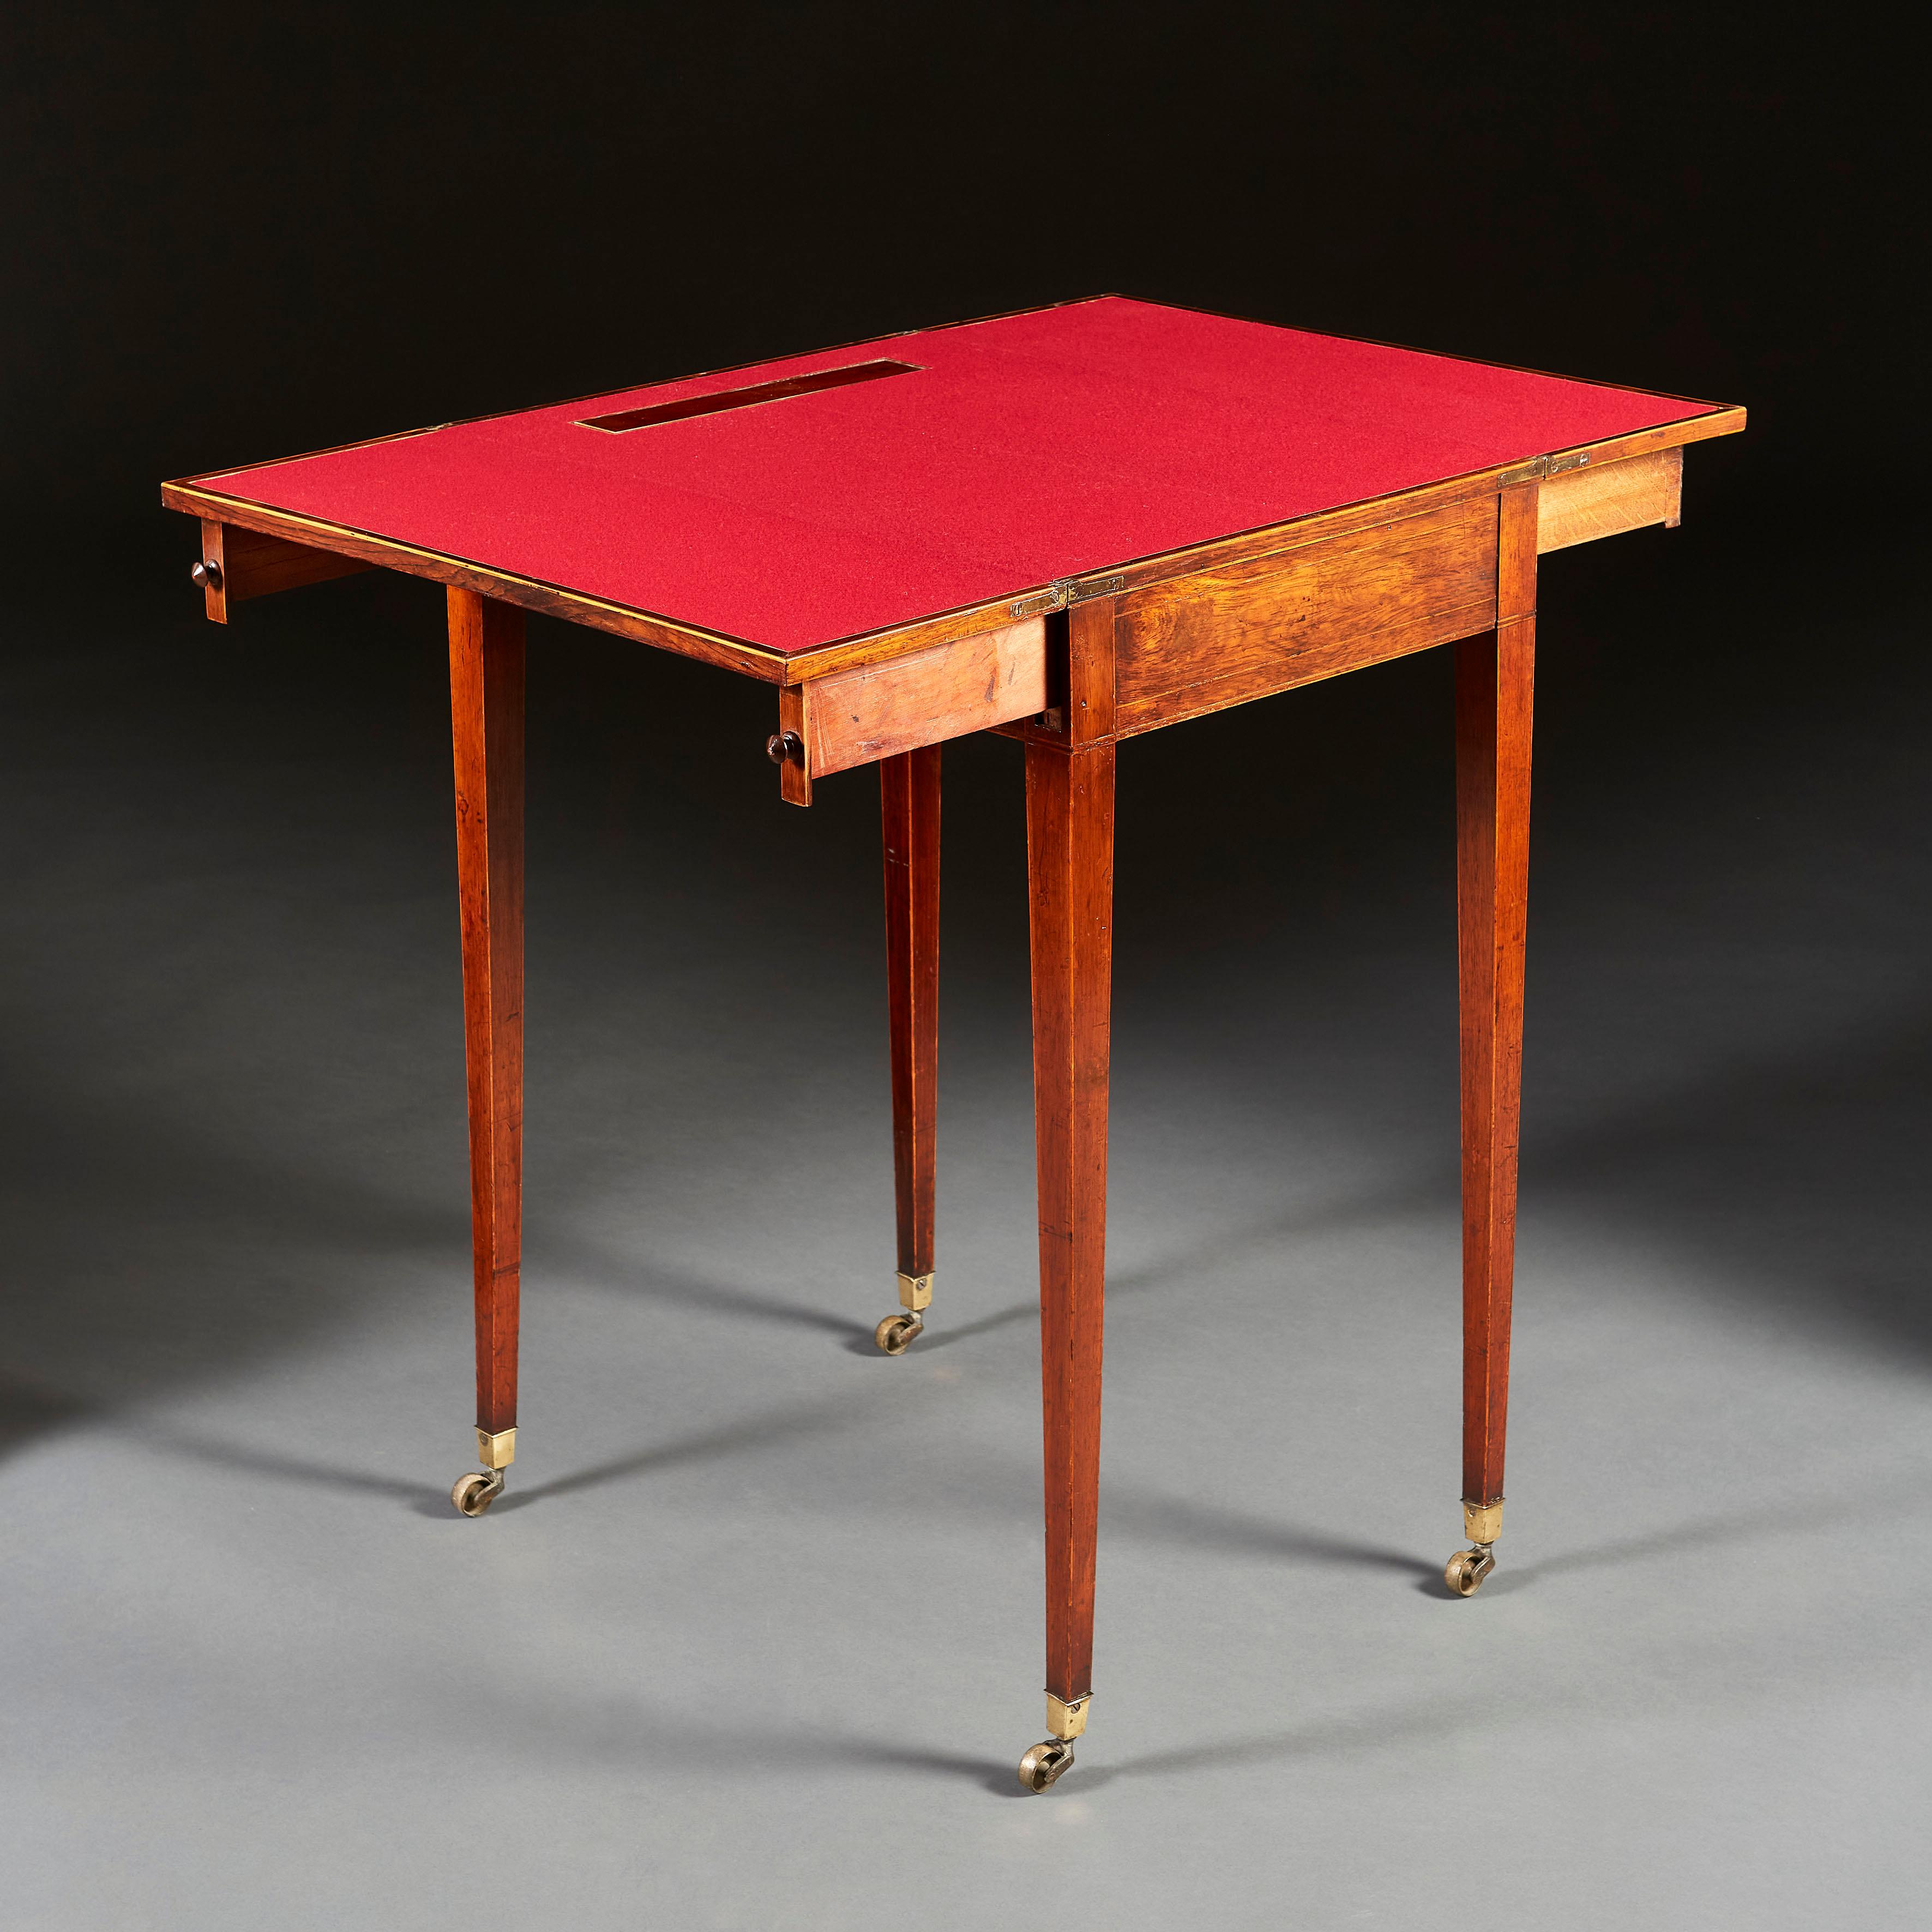 An unusual mid nineteenth century rosewood writing table, the top opening to reveal a crimson baize writing surface, with hidden inset inkwell, with one drawer to the frieze and sliders to the back, all with turned wood handles, all supported on